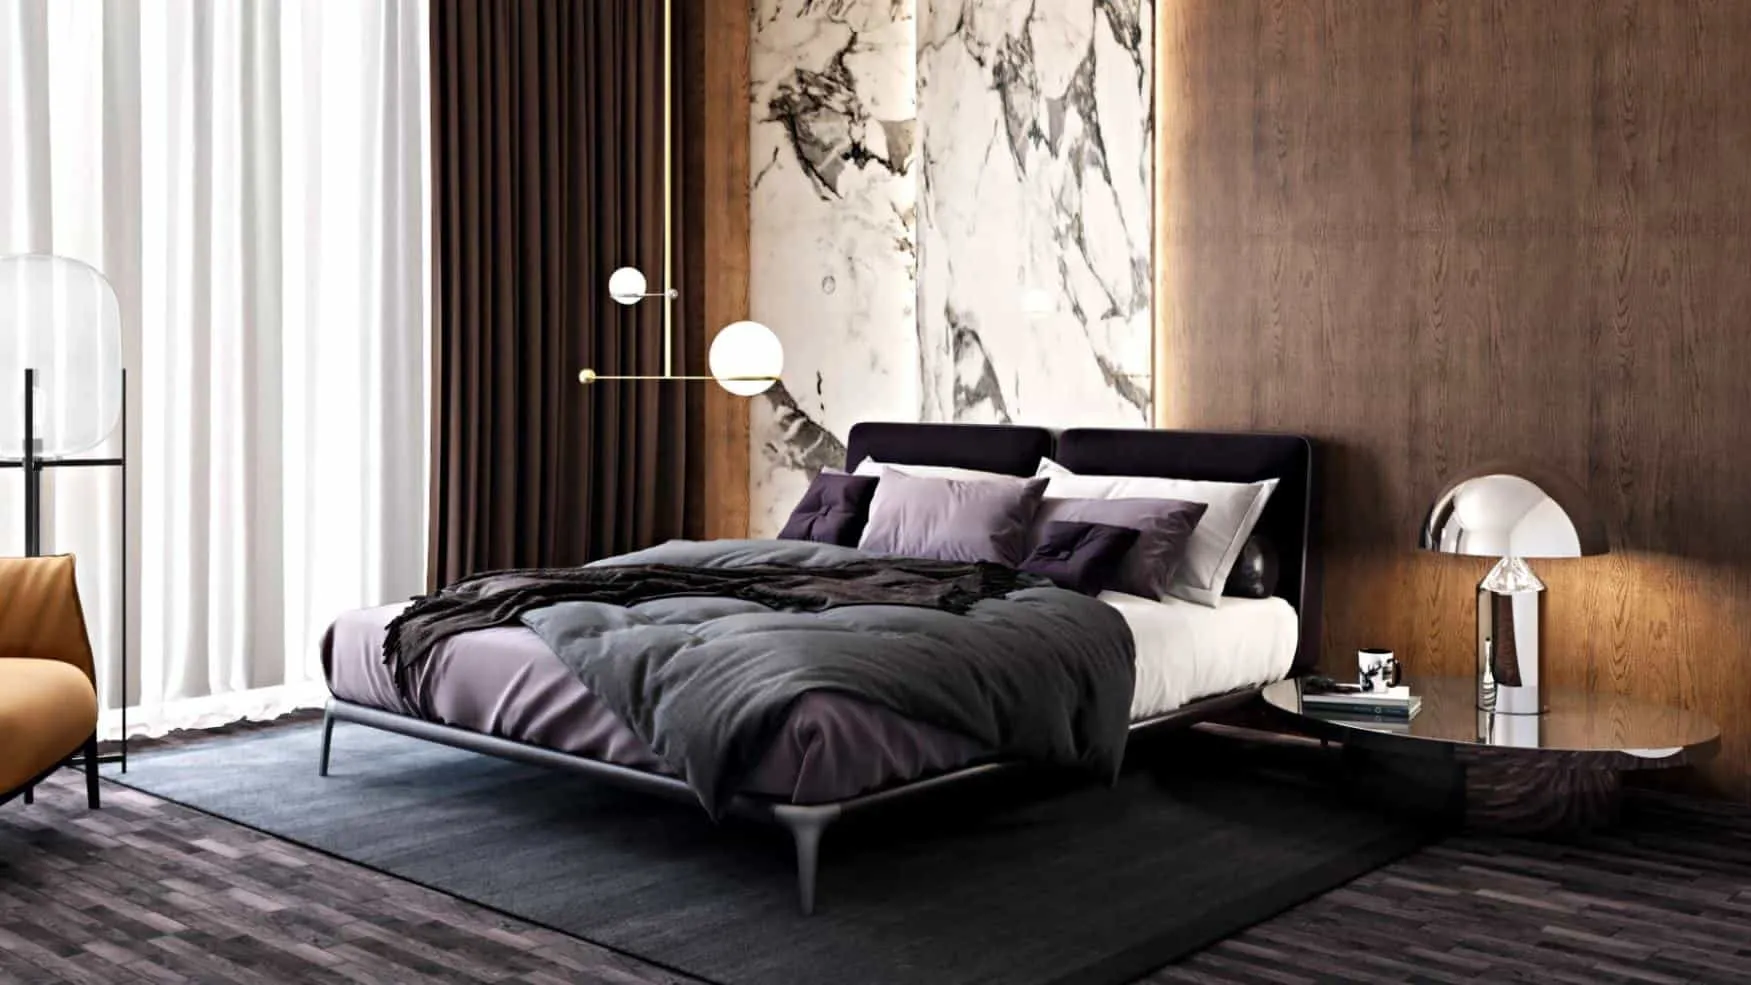 brown bedroom with a modern woode double bed design, pendant lights, black rug amd accent wall